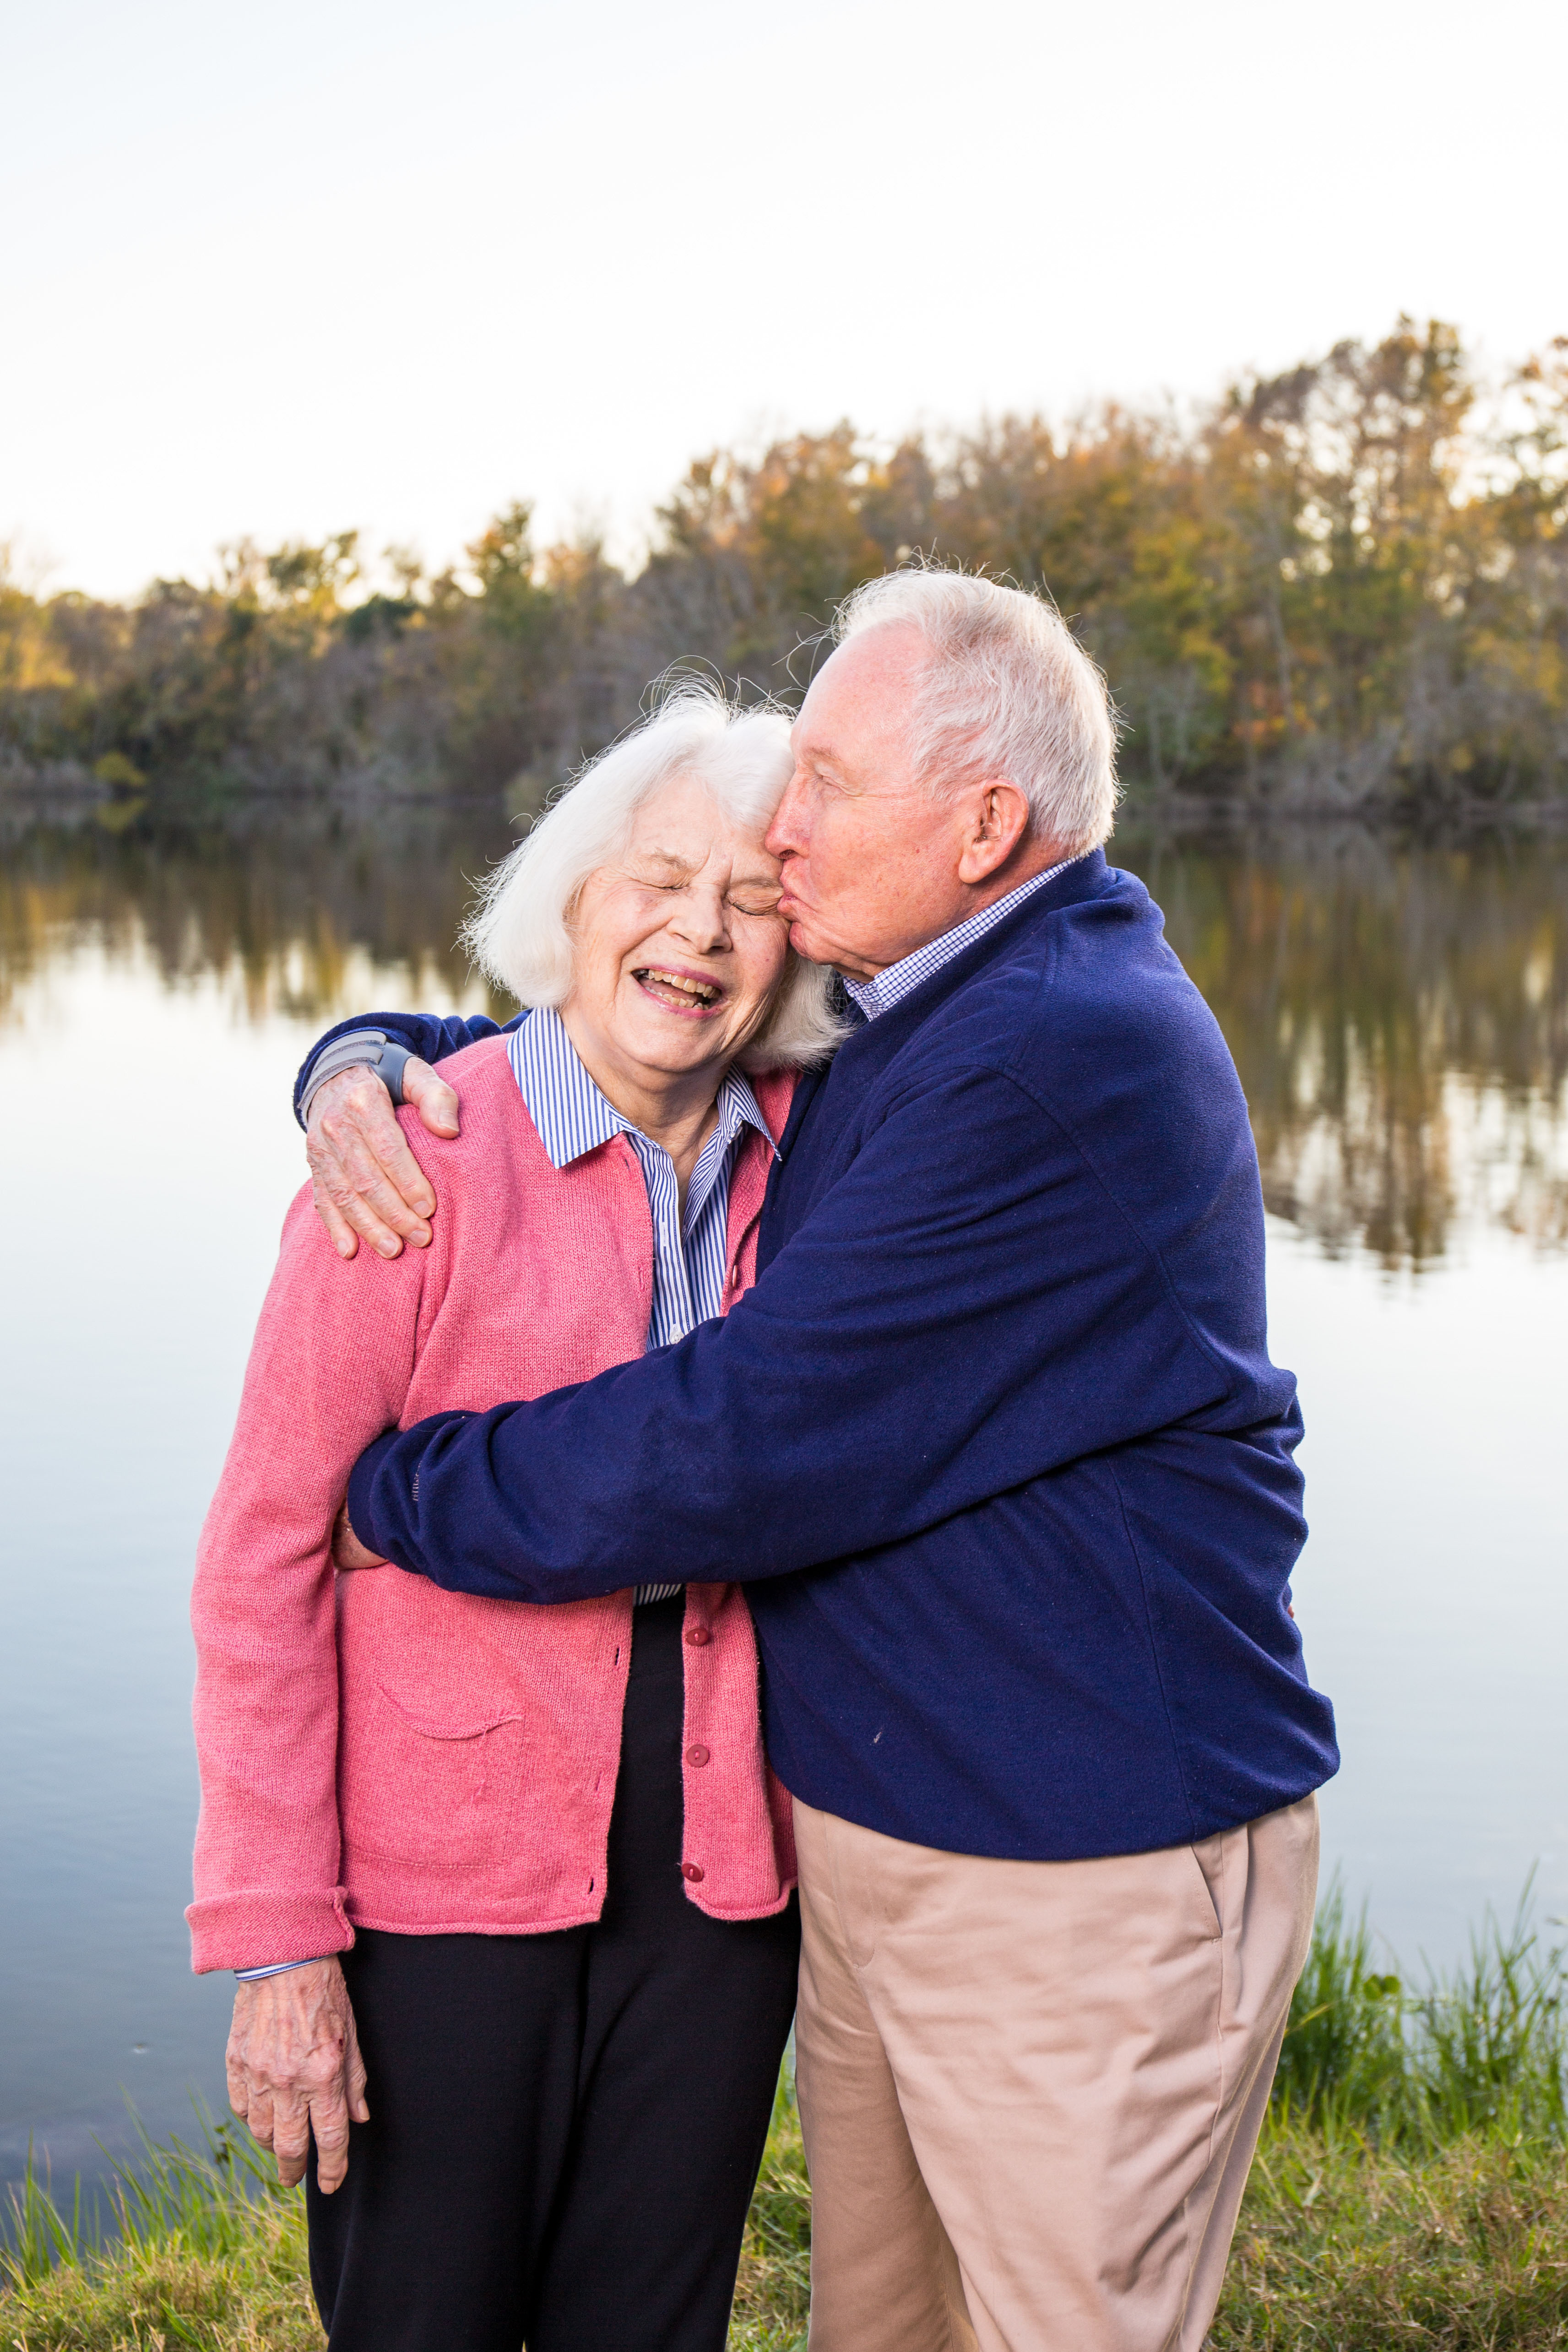 Photo of the Wiltshire at Lake Alice. Jim is hugging Susan and kissing her forehead.